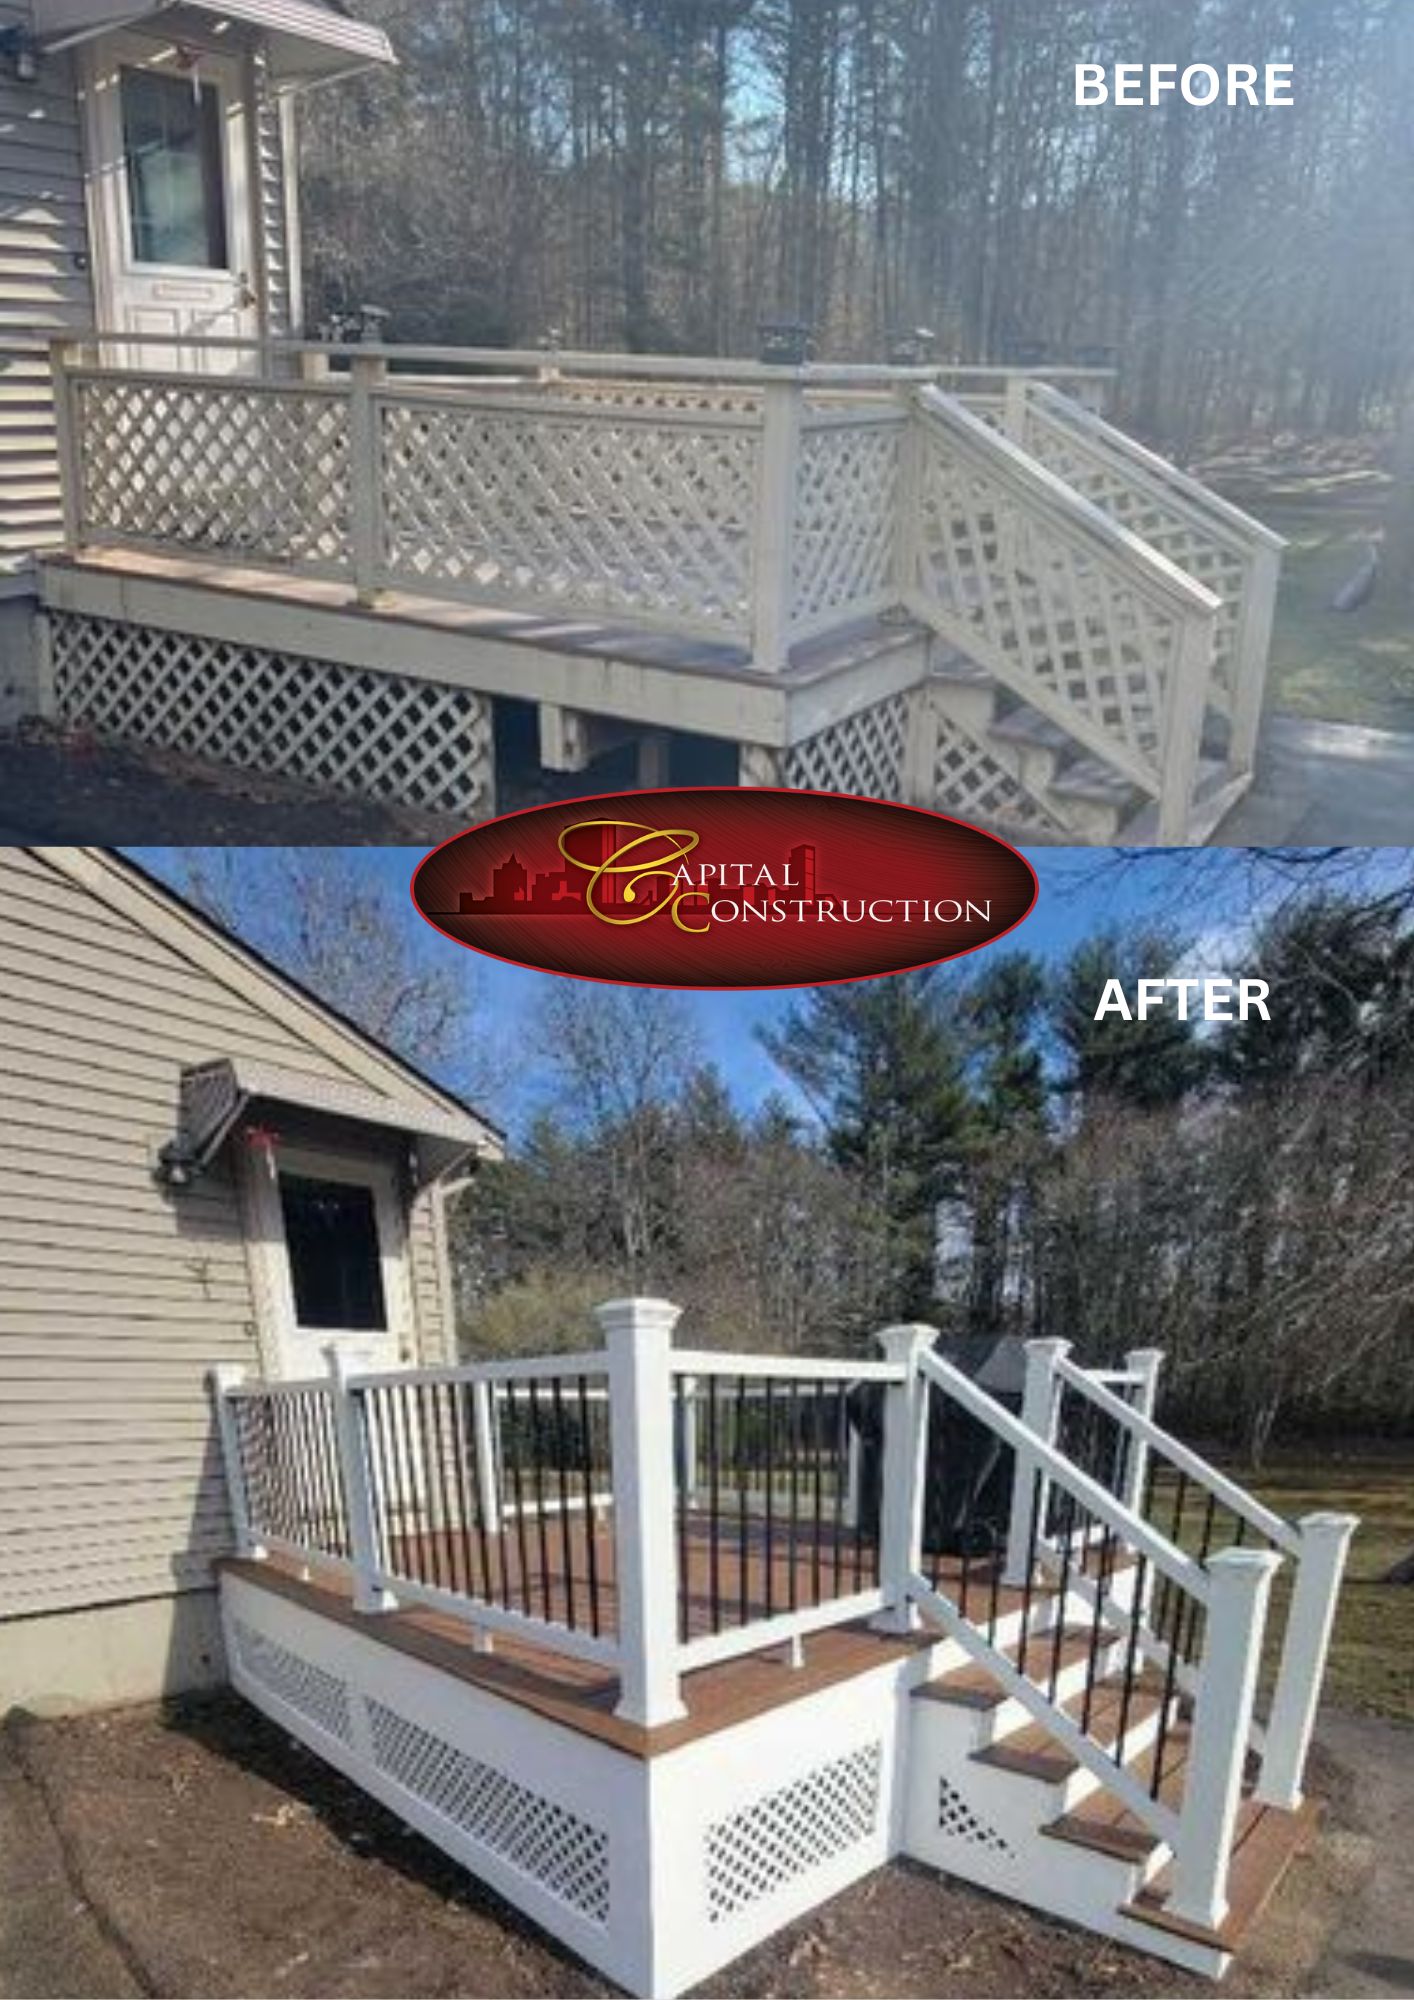 Before and after photos of a Trex decking installation in Lakeville, MA